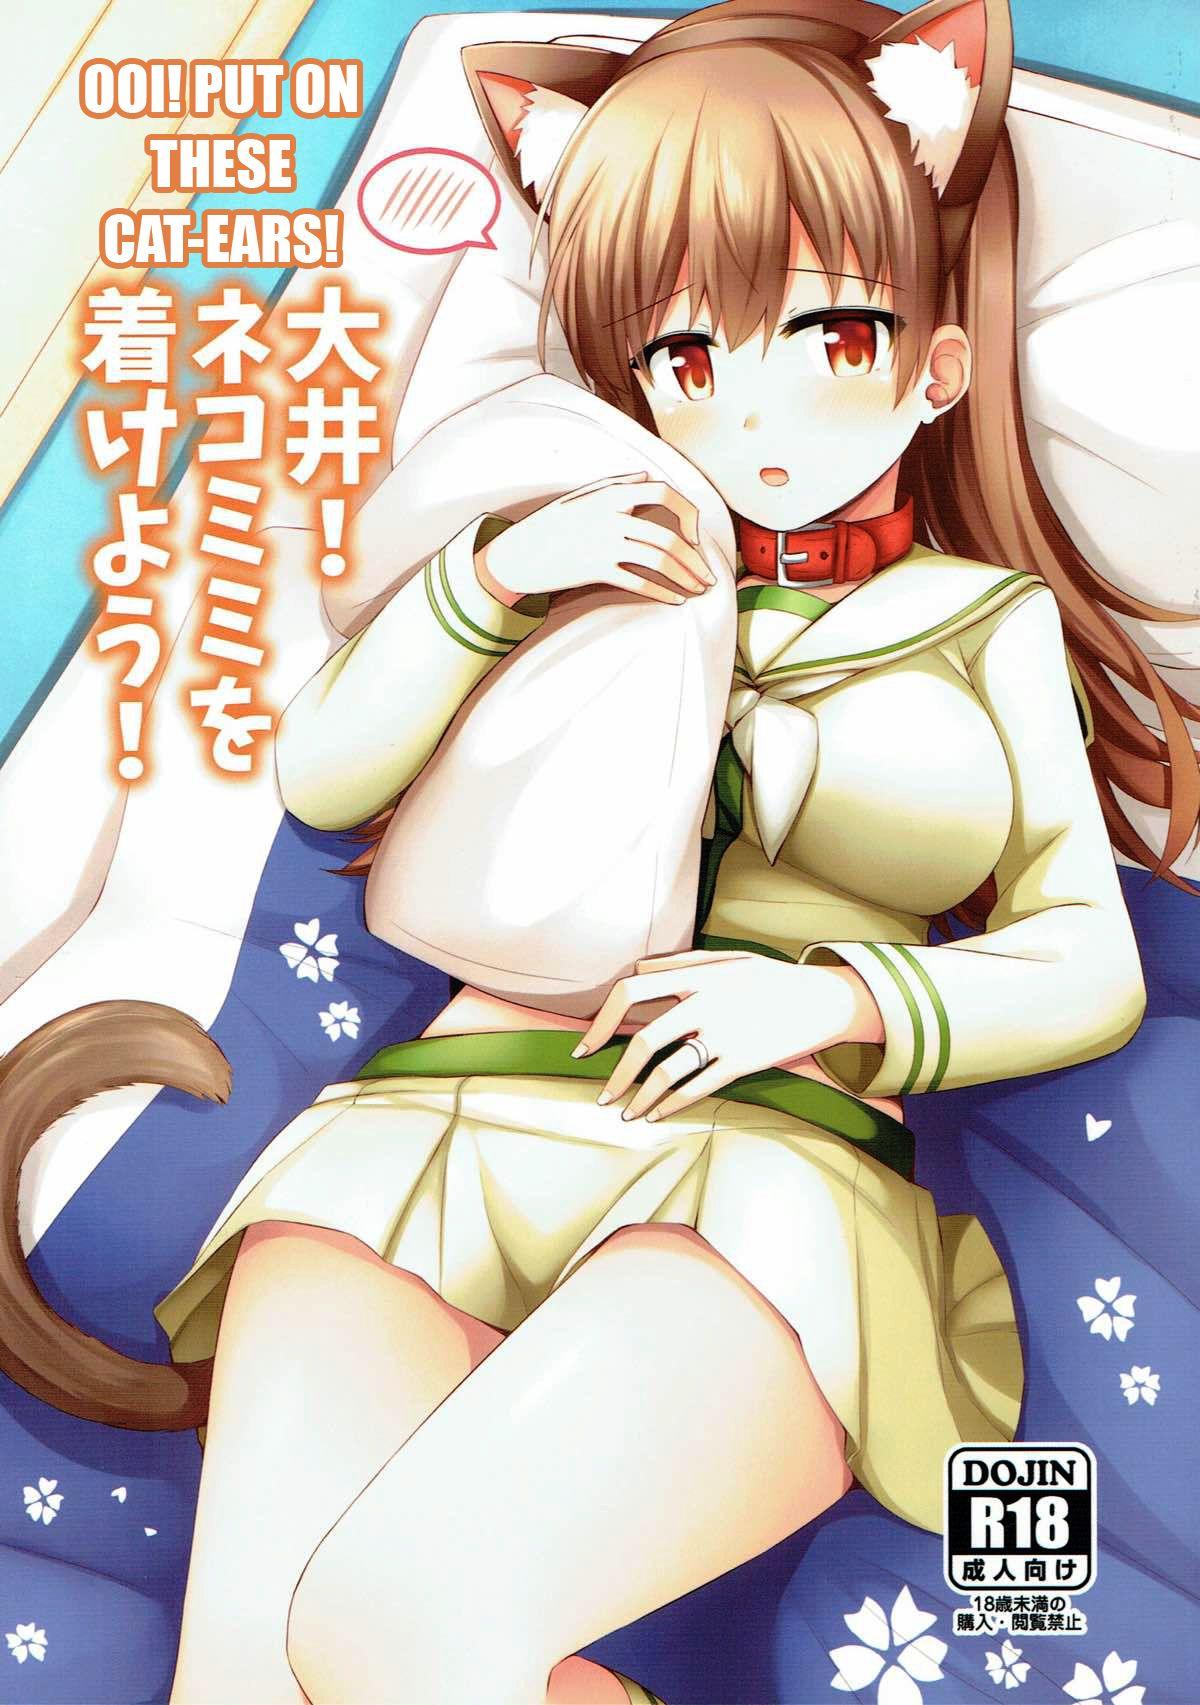 Rubbing Ooi! Nekomimi o Tsukeyou! | Ooi! Put On These Cat Ears! - Kantai collection Camsex - Page 1